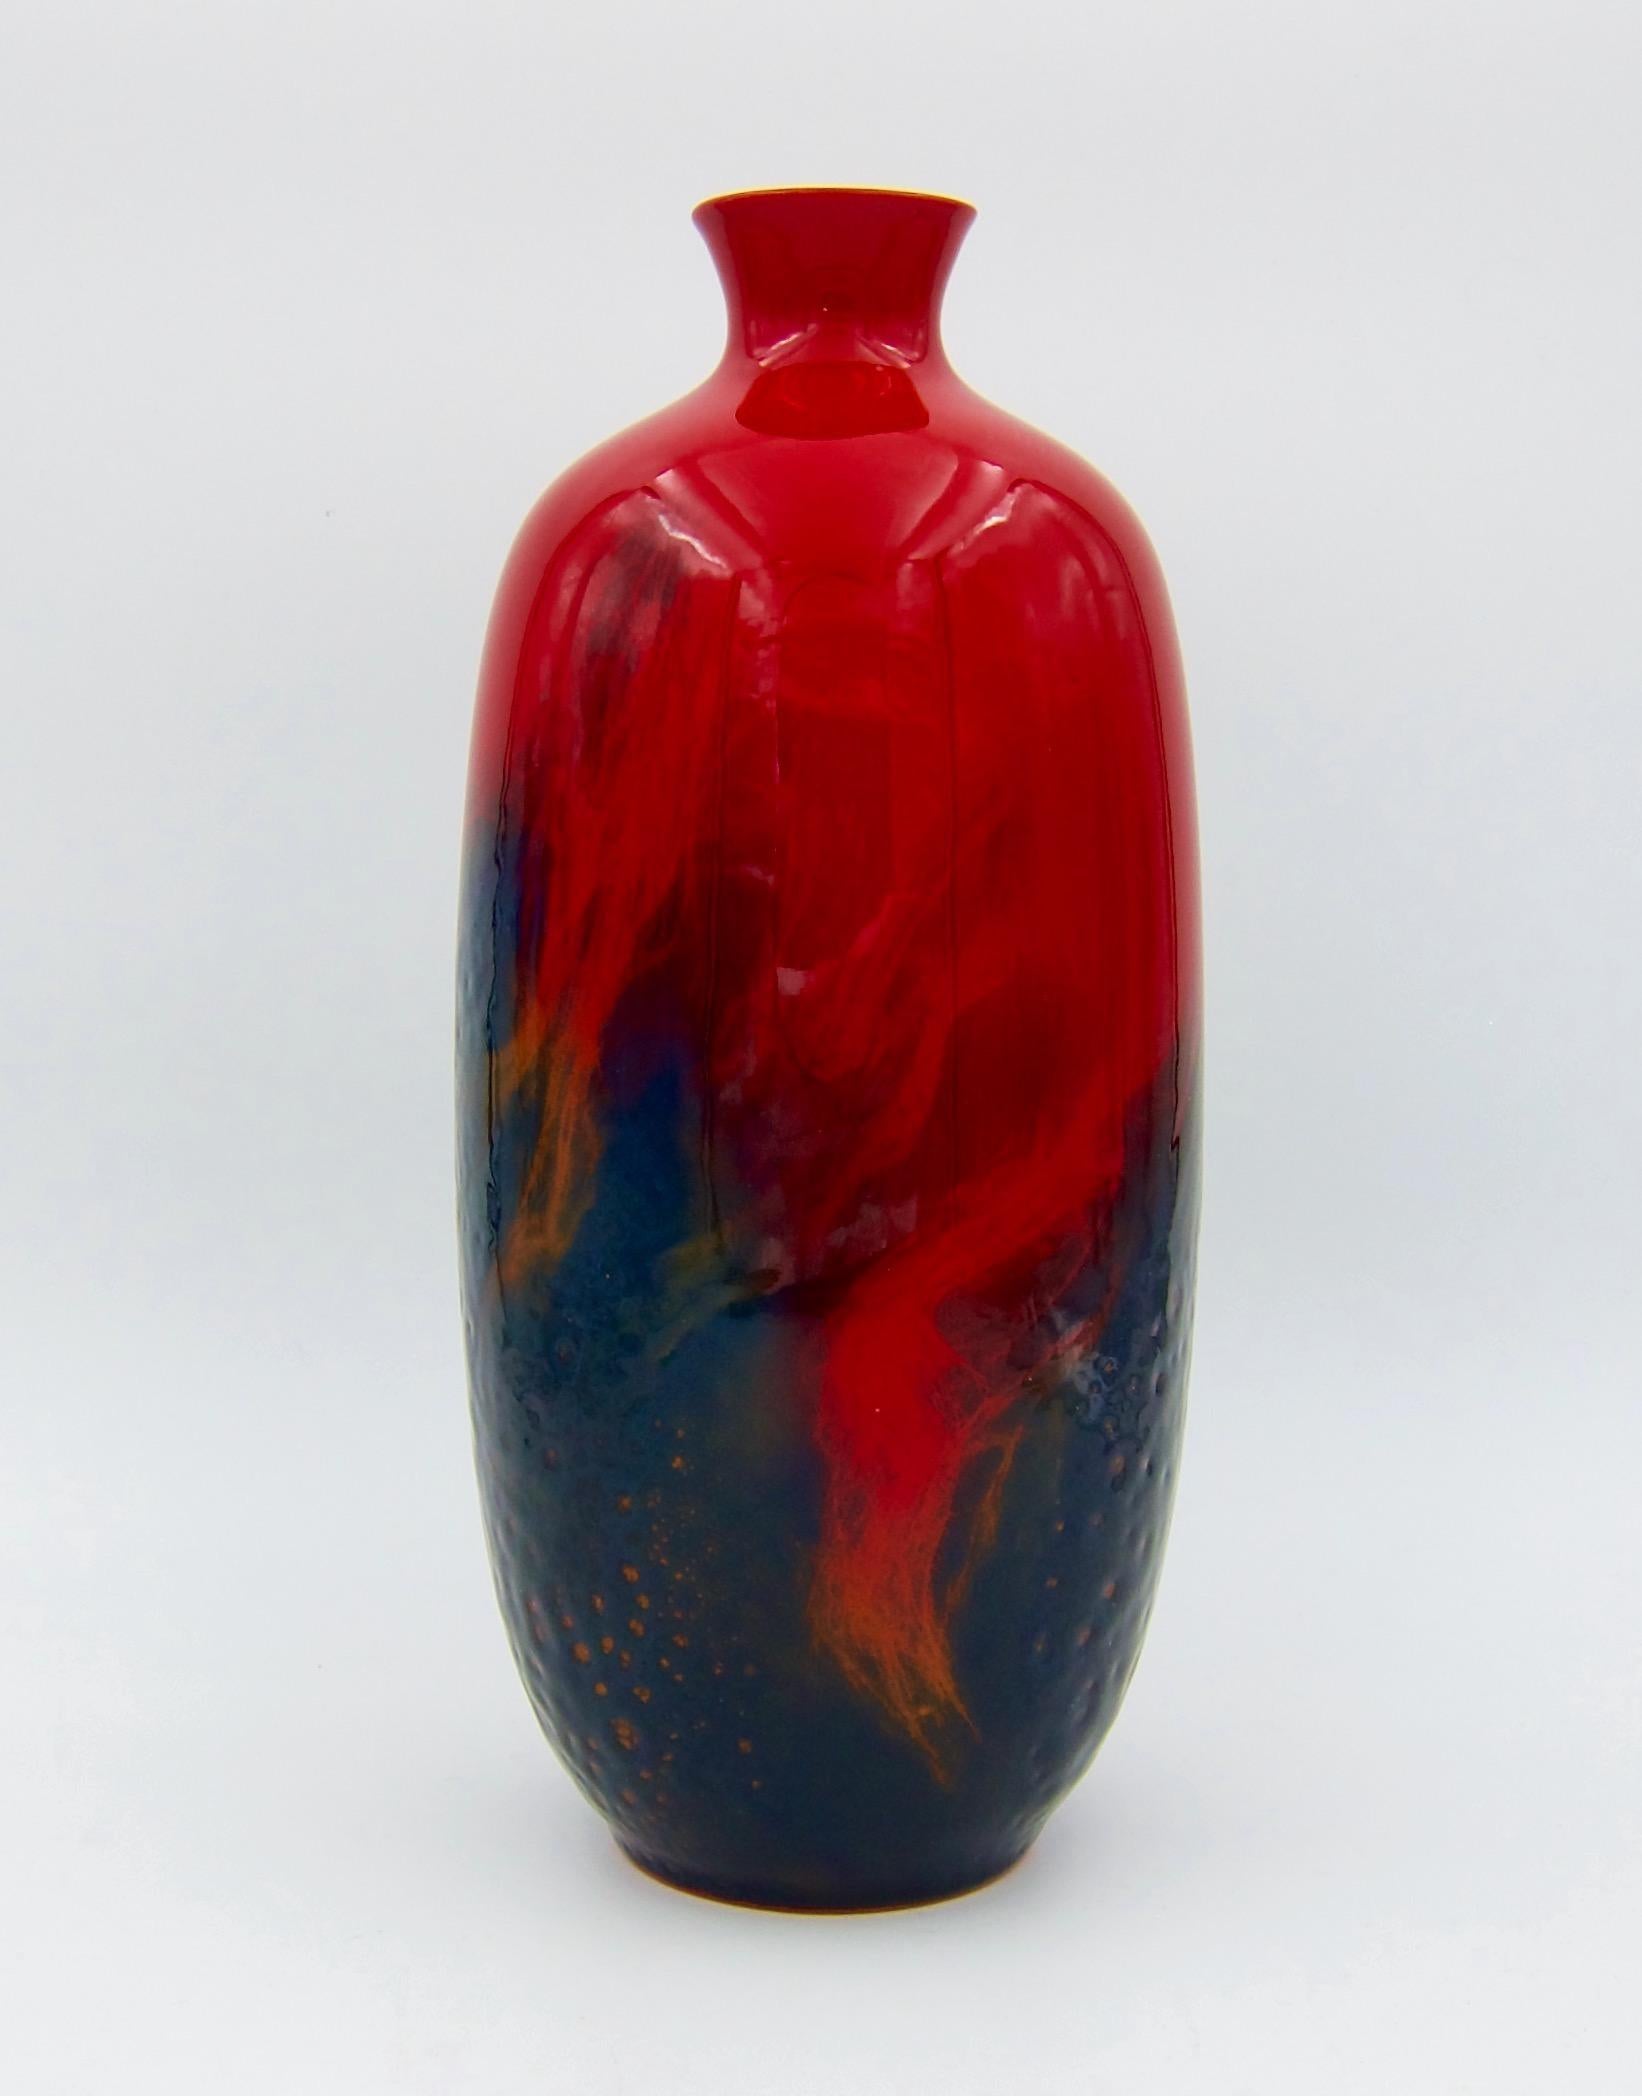 20th Century Large Royal Doulton Red Flambe Vase from the Art Deco Period